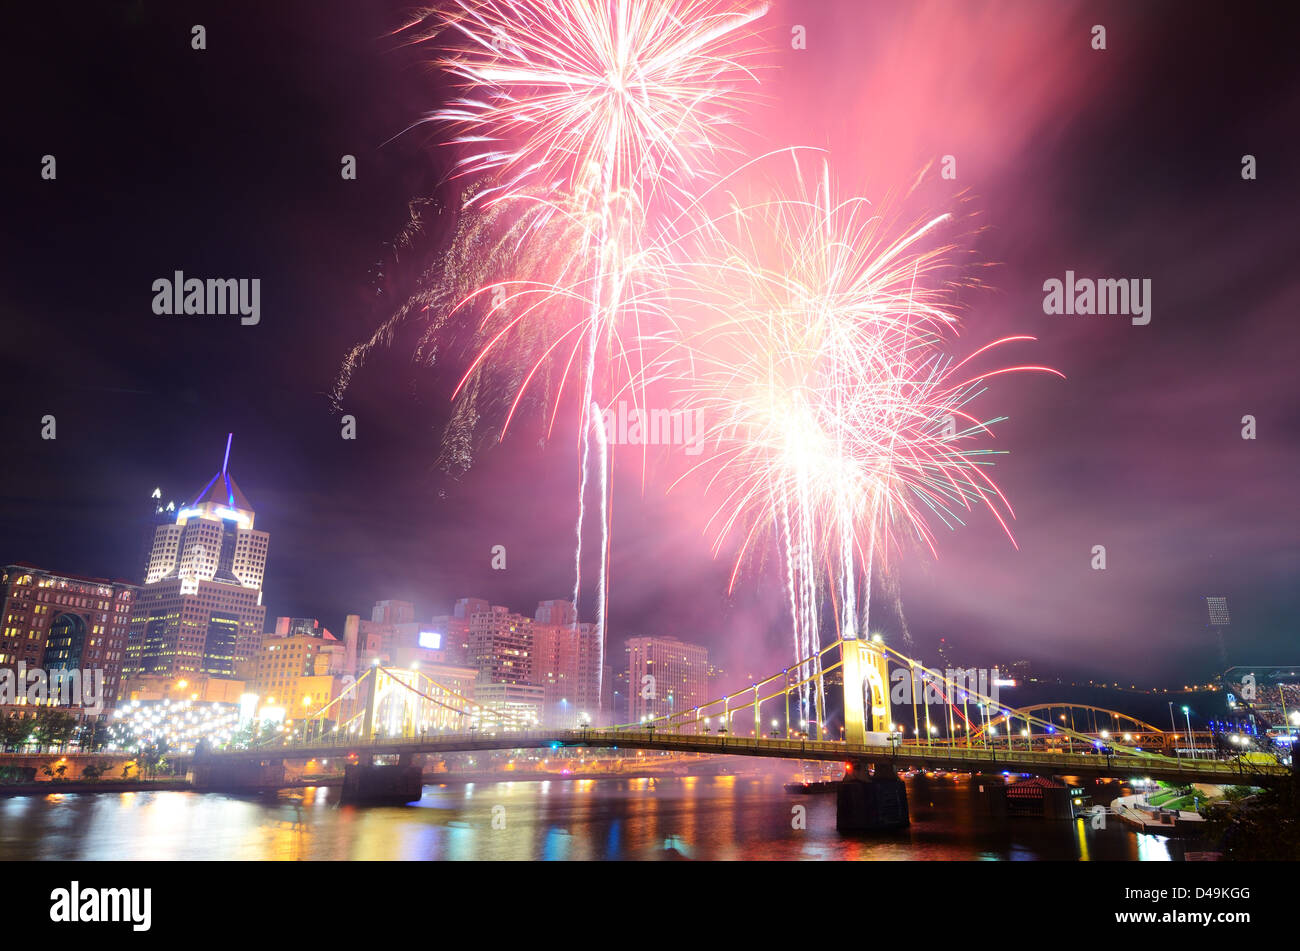 Fireworks on the Allegheny river in downtown Pittsburgh, Pennsylvania, USA. Stock Photo